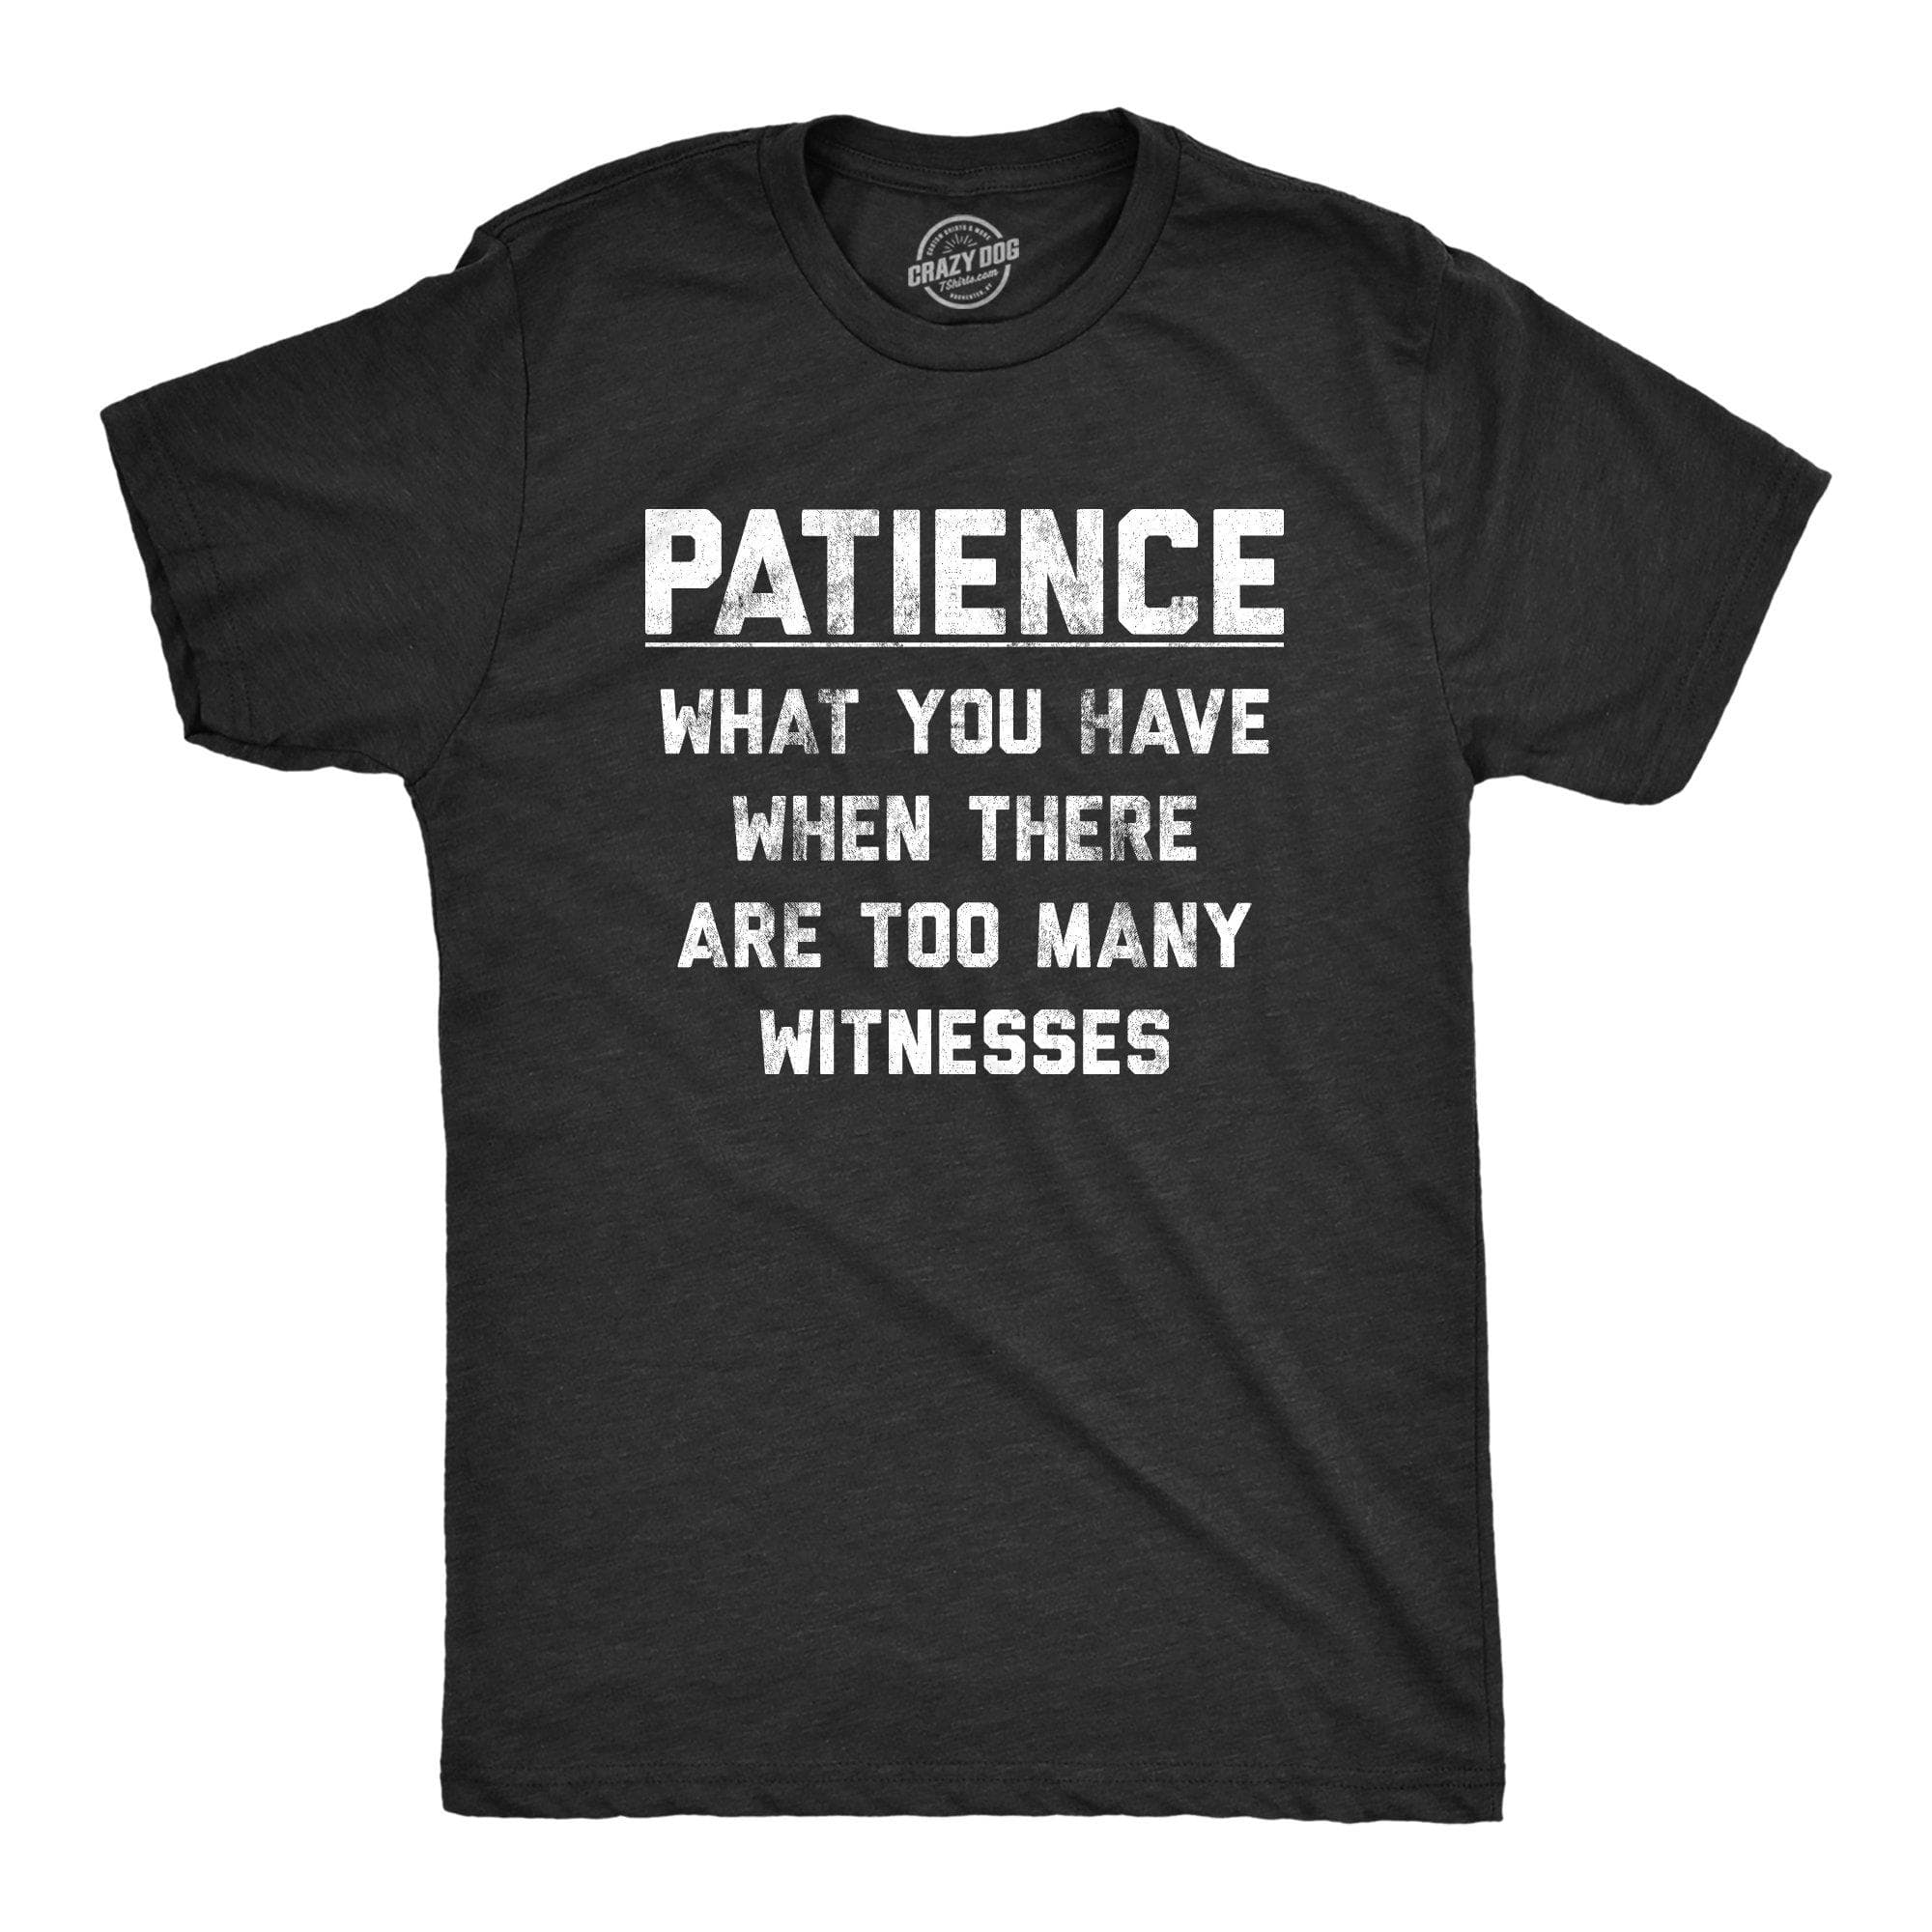 Patience What You Have When There Are Too Many Witnesses Men's Tshirt - Crazy Dog T-Shirts